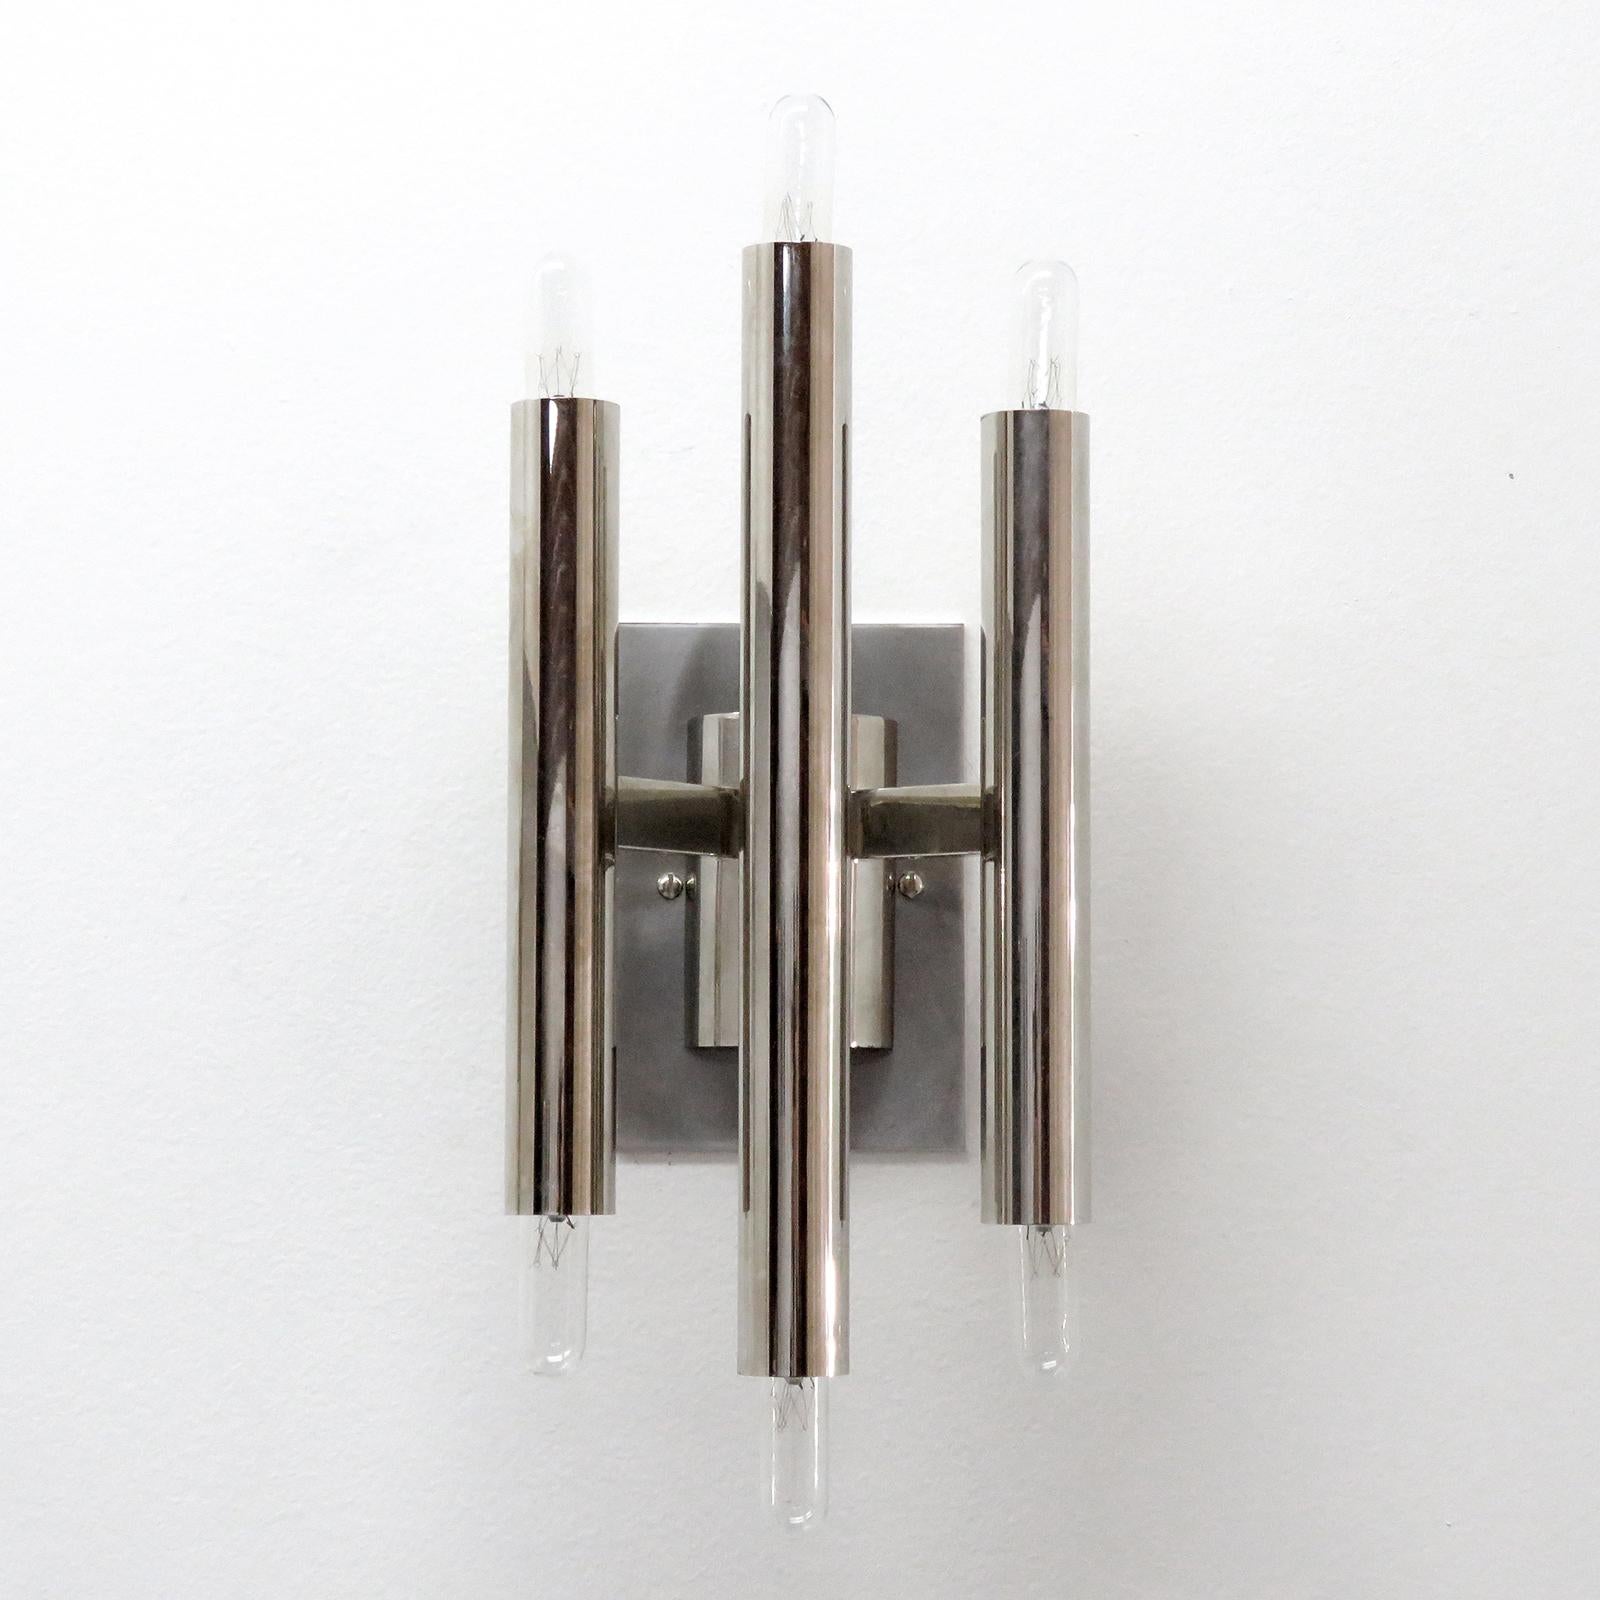 Great pair of geometric wall lights by Gaetano Sciolari with three nickel plated double candles. Six E12 sockets per fixture, max. wattage 40w each or LED equivalent, wired for US standards, bulbs provided as a onetime courtesy.